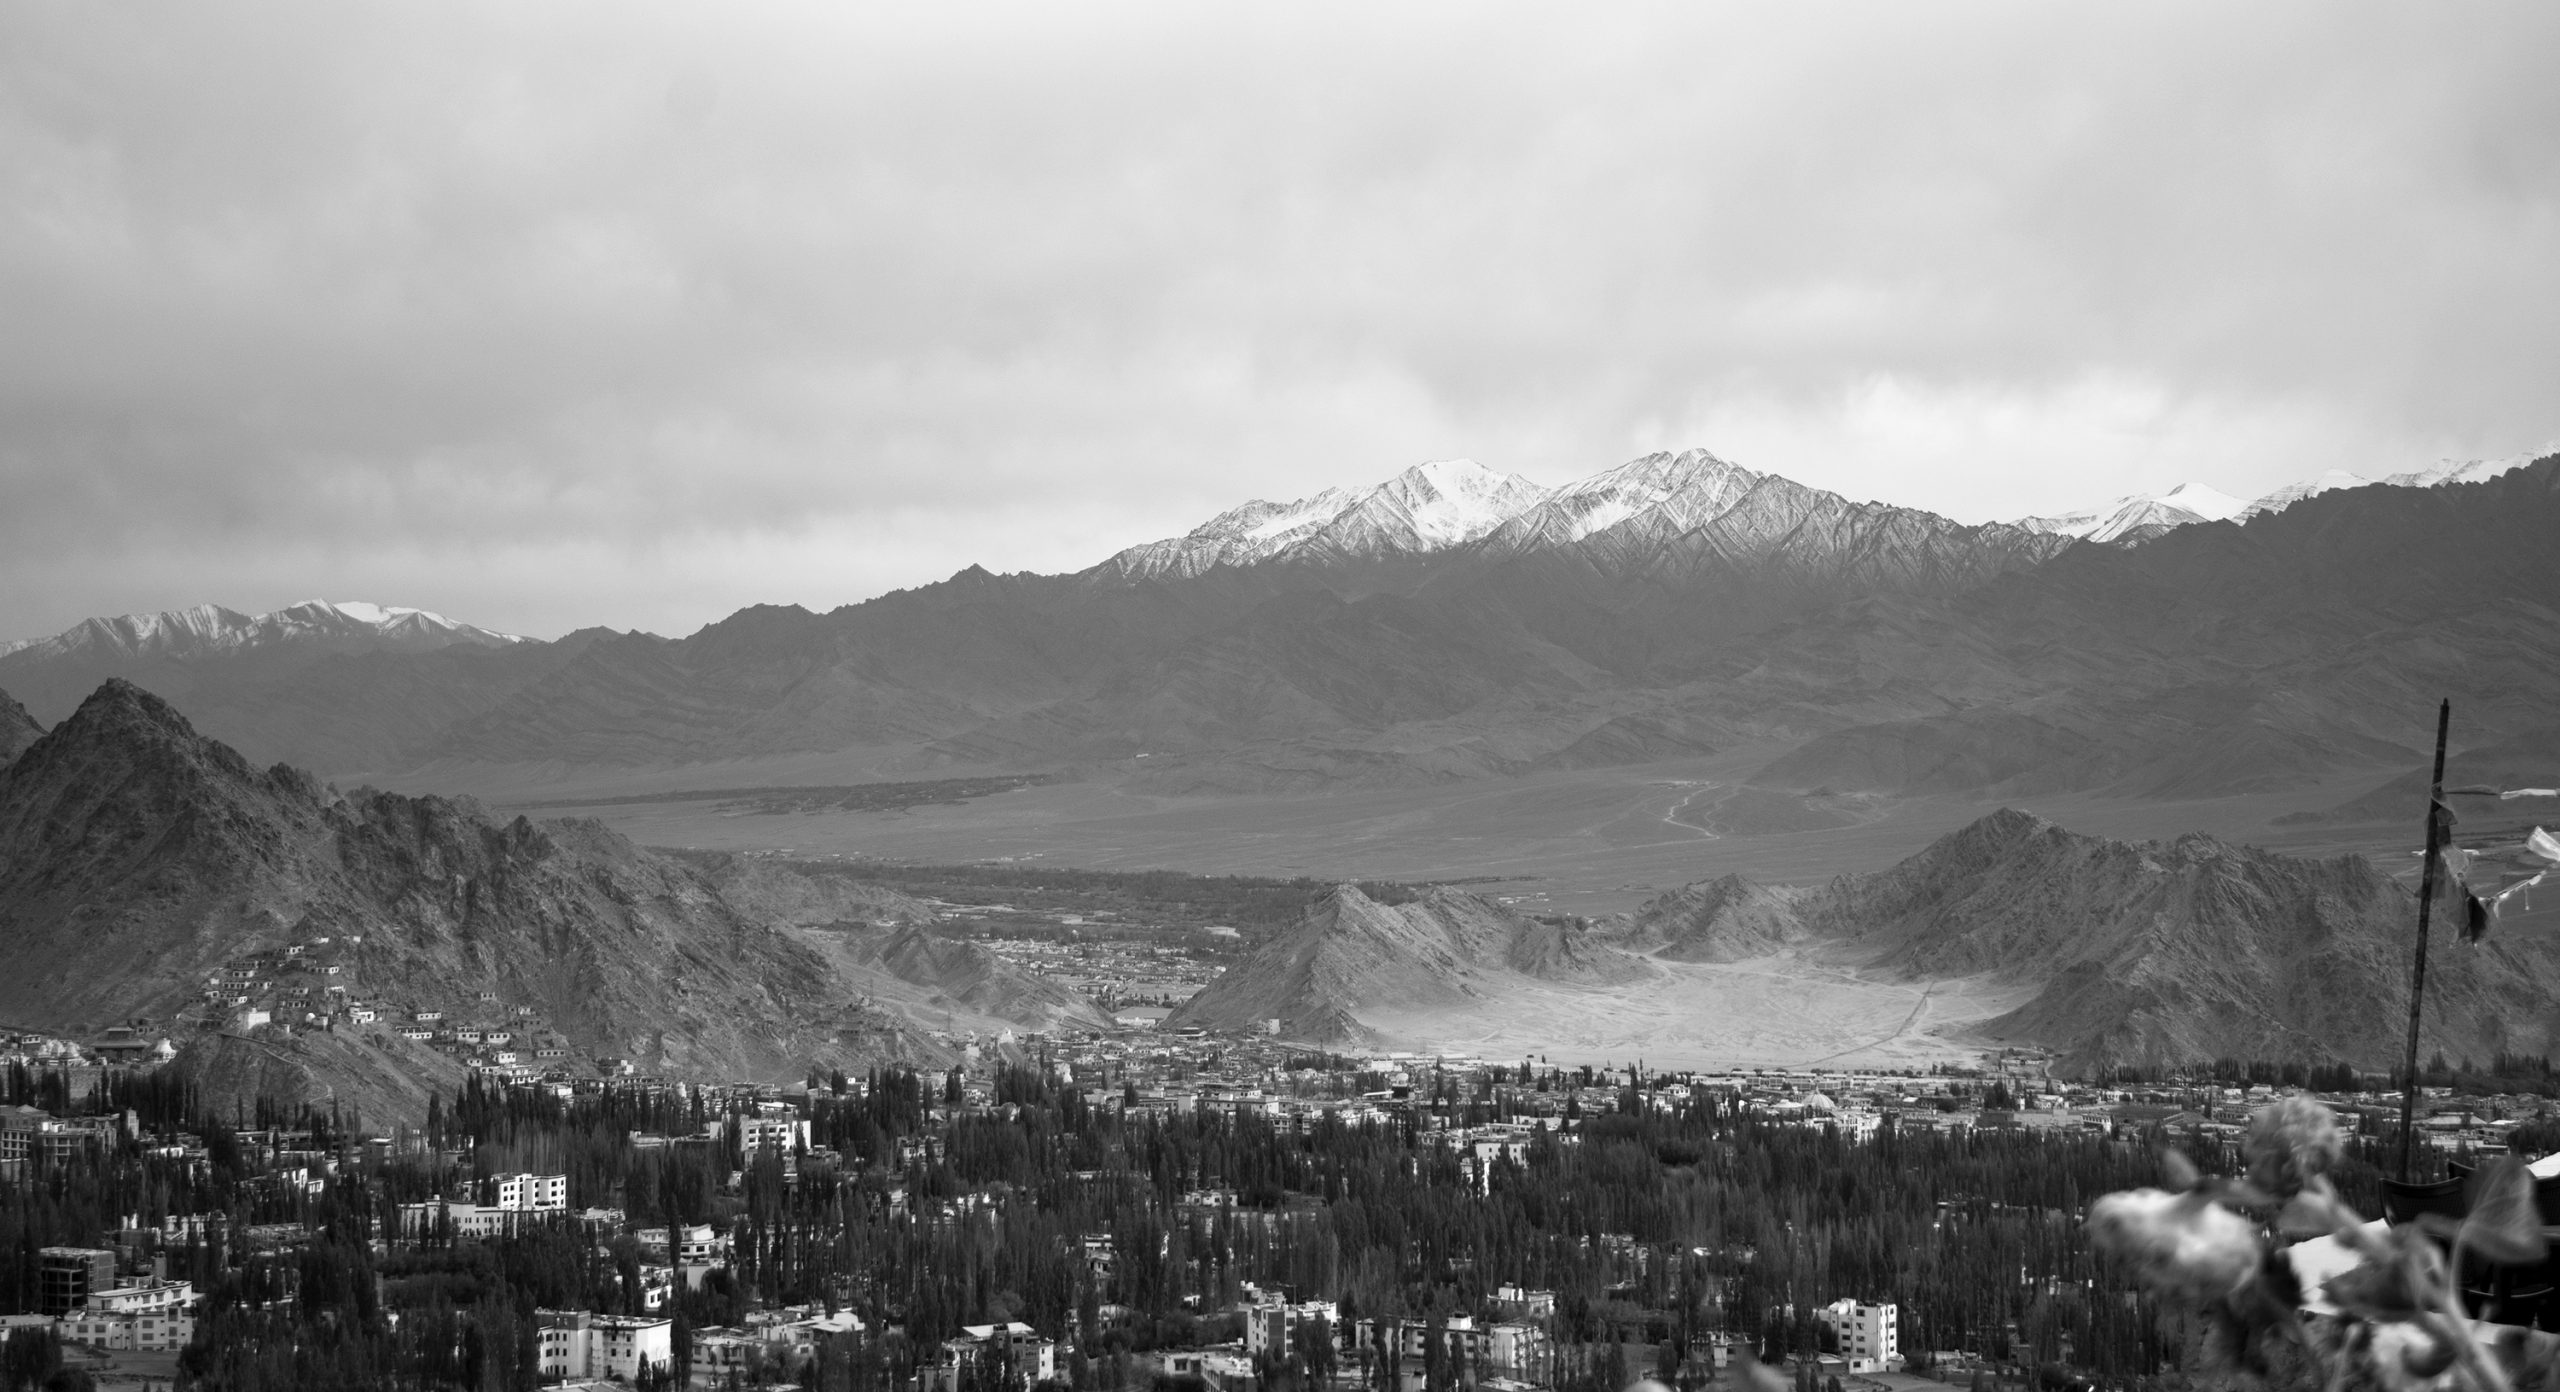 A greyscale view of a valley